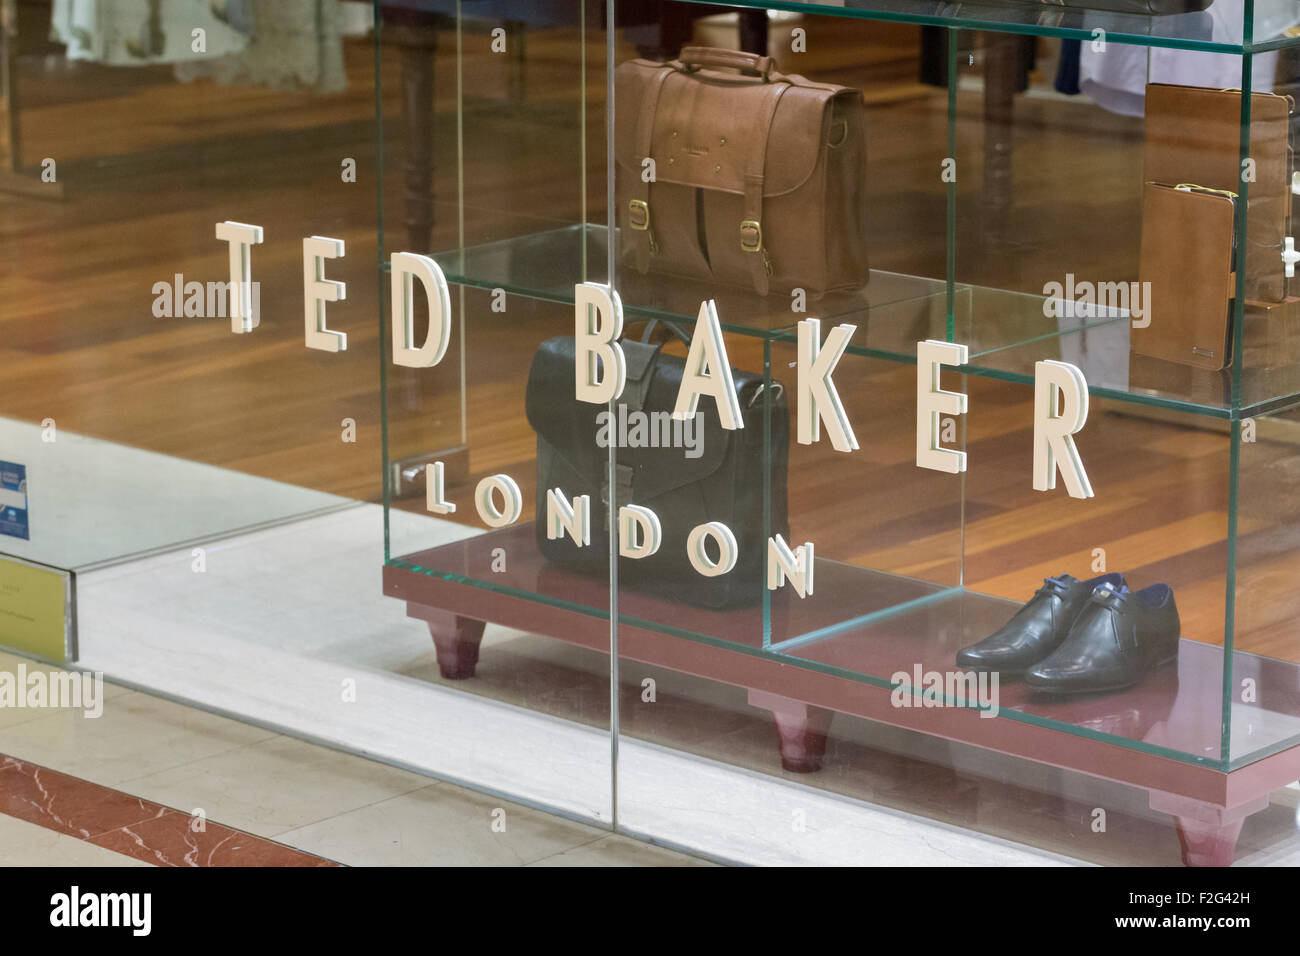 Ted Baker store Stock Photo